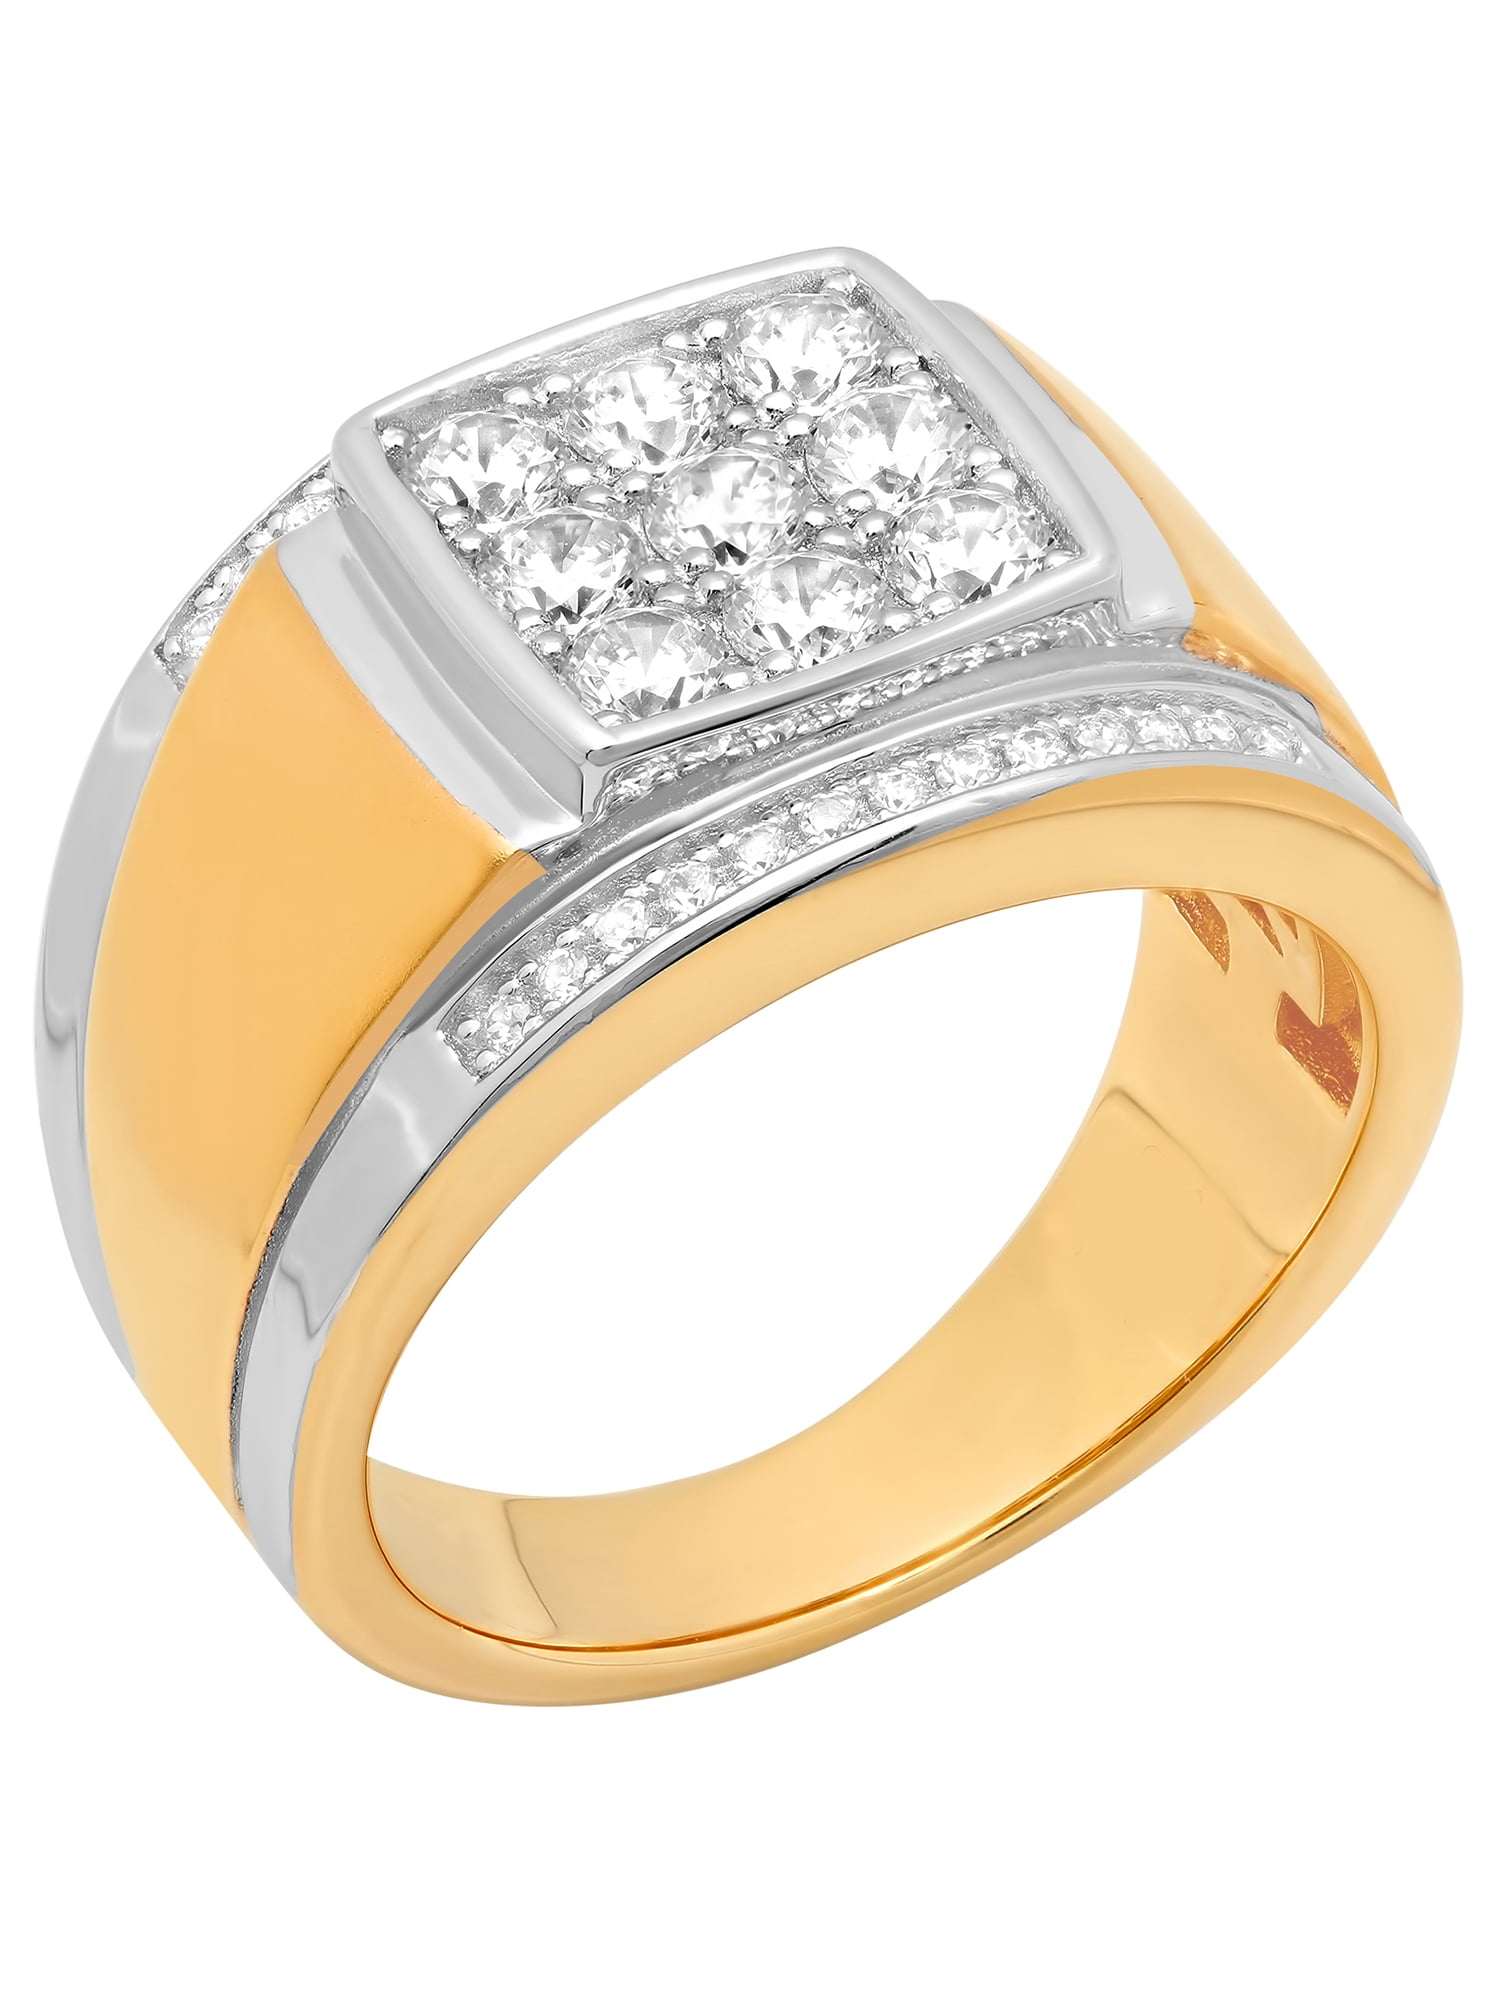 Details about   14K Yellow Gold Plating Cubic Zirconia Dia Sterling Silver Wedding Ring Set 